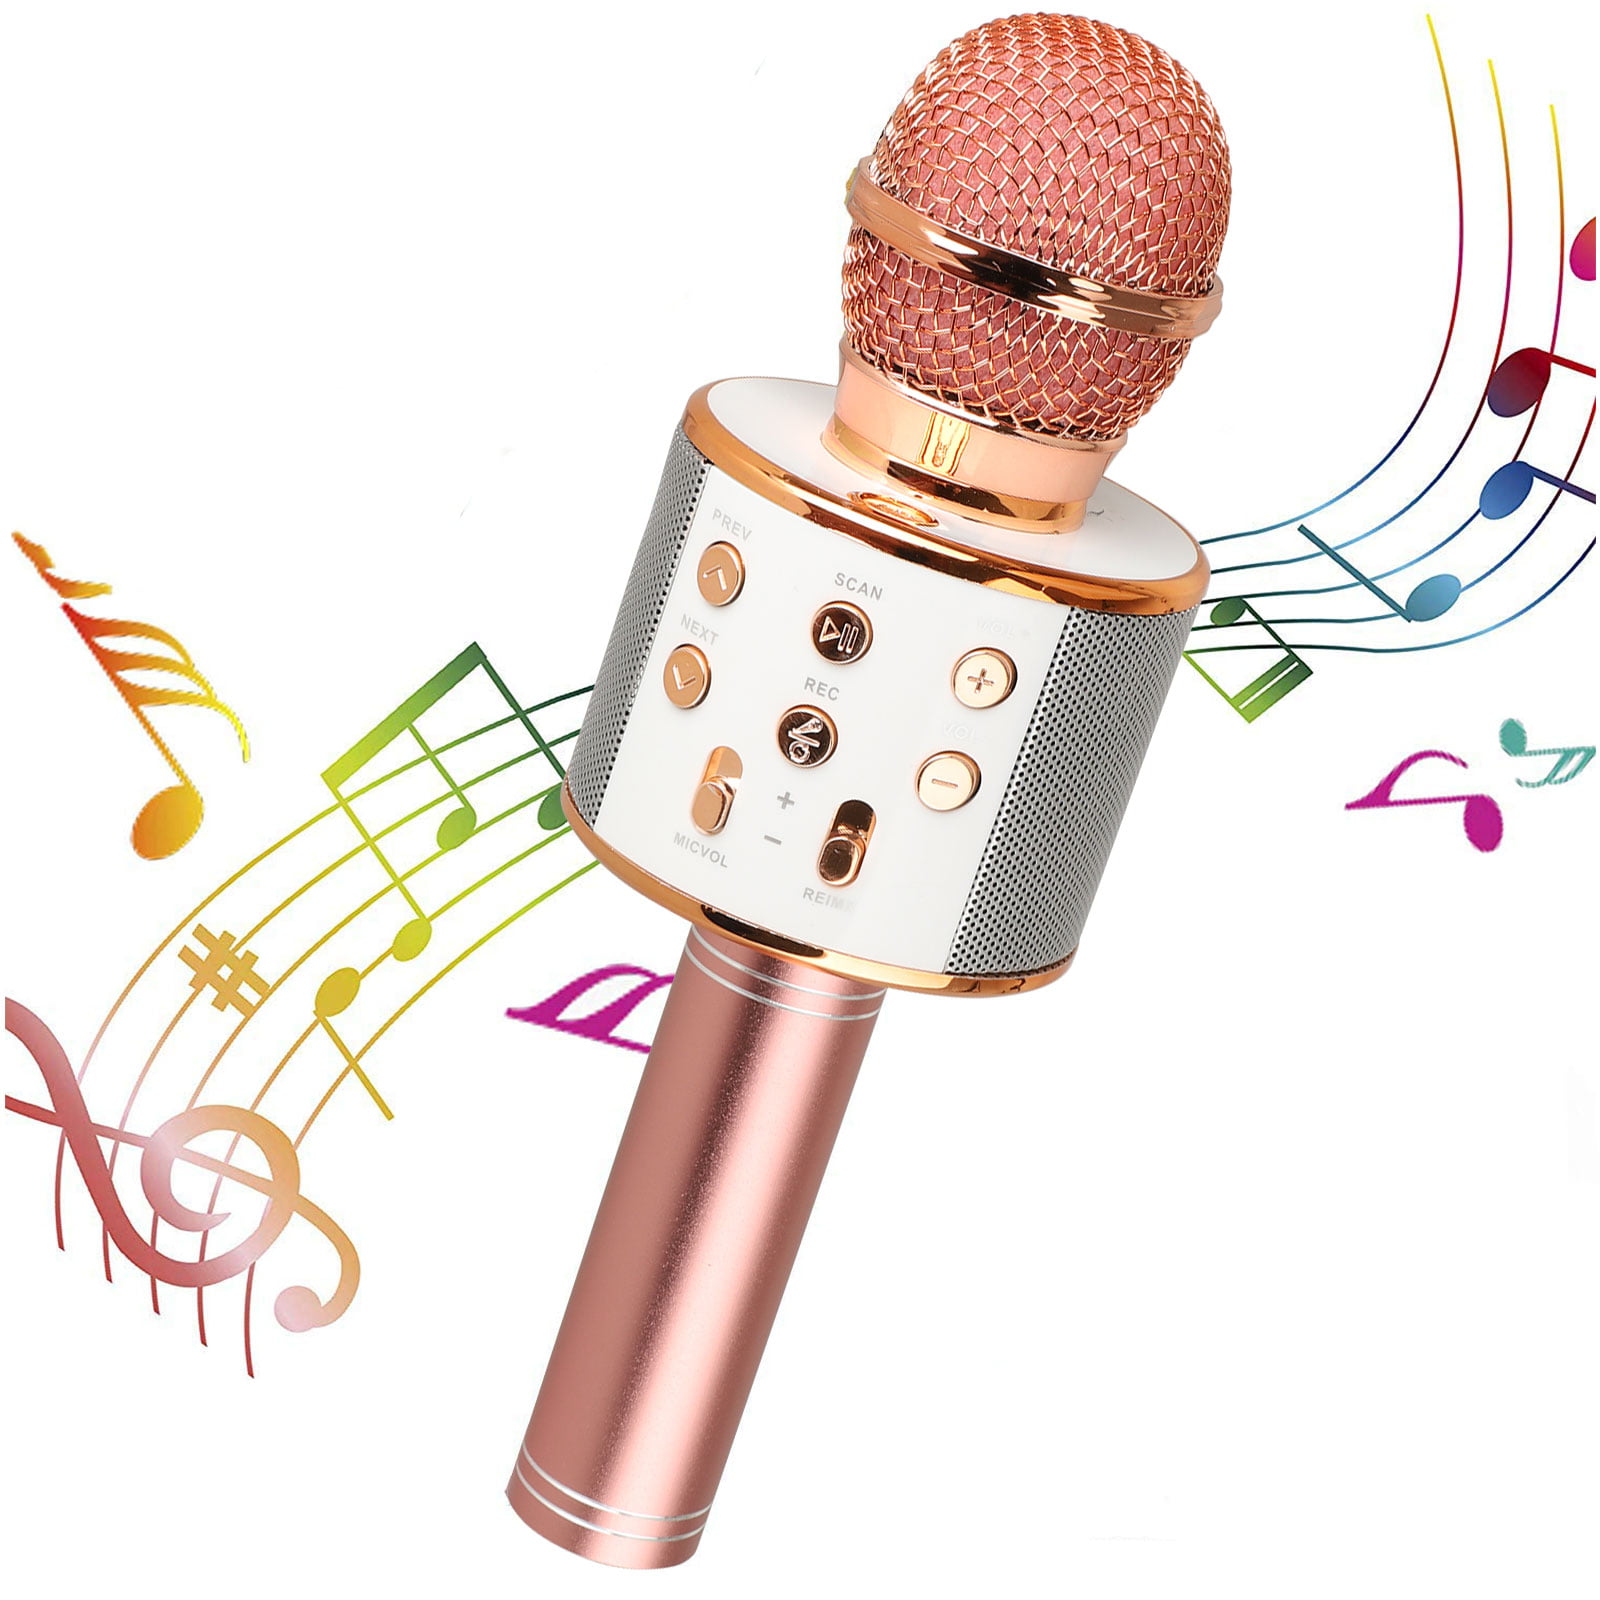 Wireless Bluetooth Karaoke Microphone for kids adults, Handheld Karaoke Mic Speaker Machine for Home Birthday Party, Portable Microphone for Kids, Gifts Toys for Kids, Girls, Boys and Adults